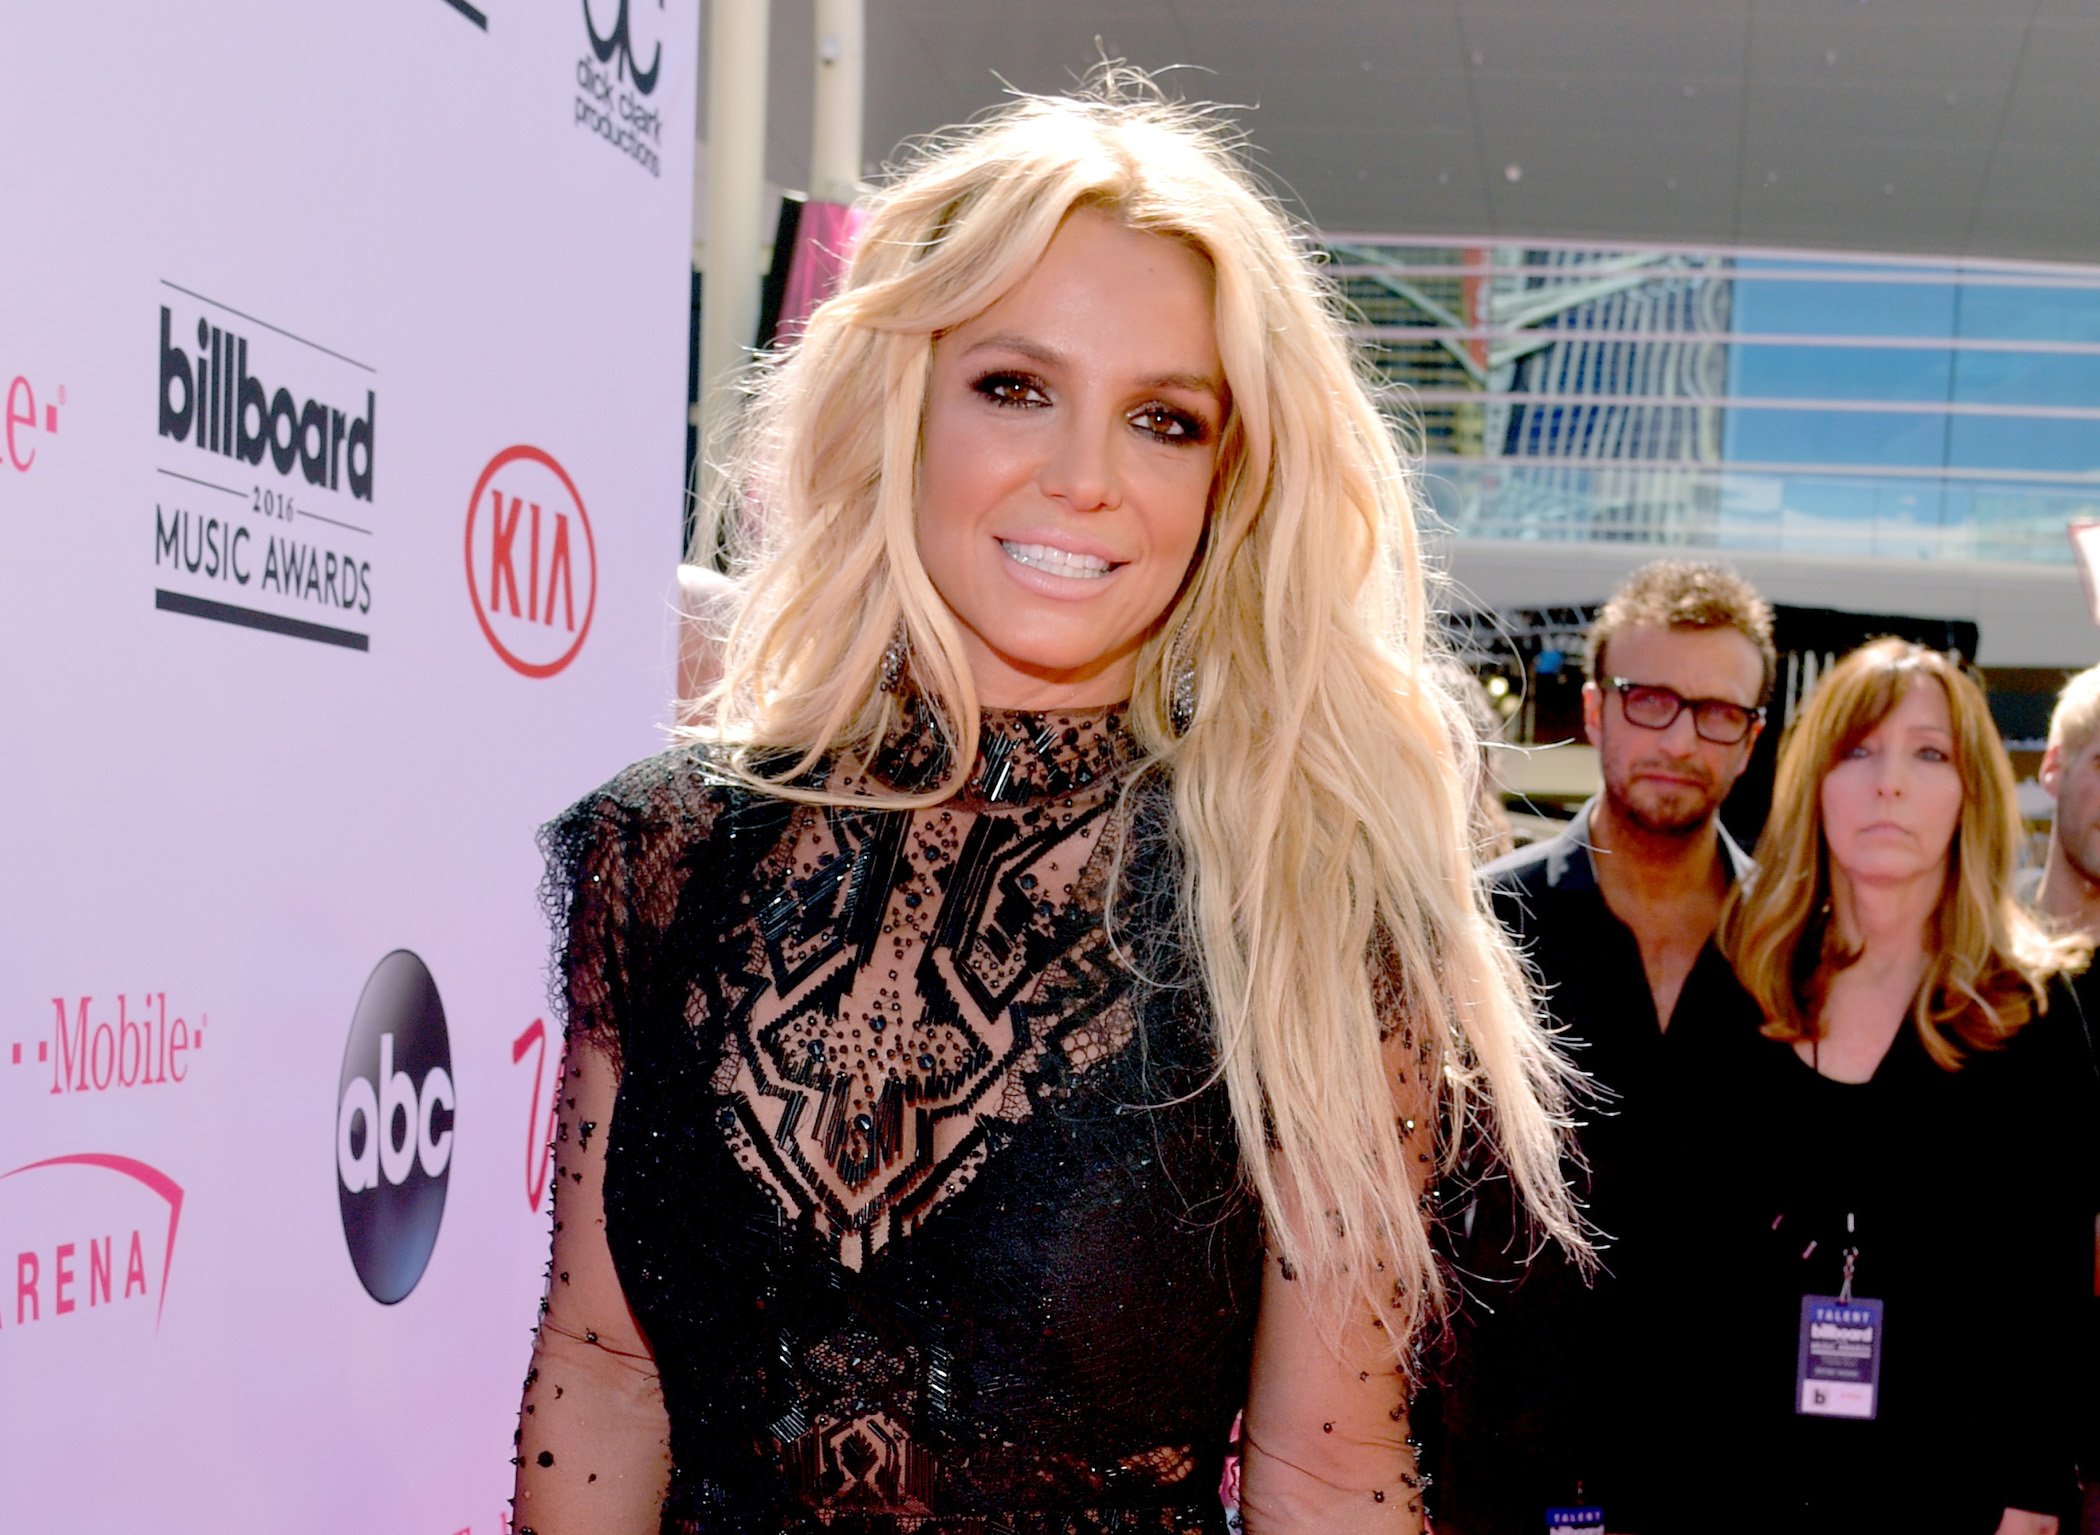 Britney Spears smiling for the camera while attending the 2016 Billboard Music Awards